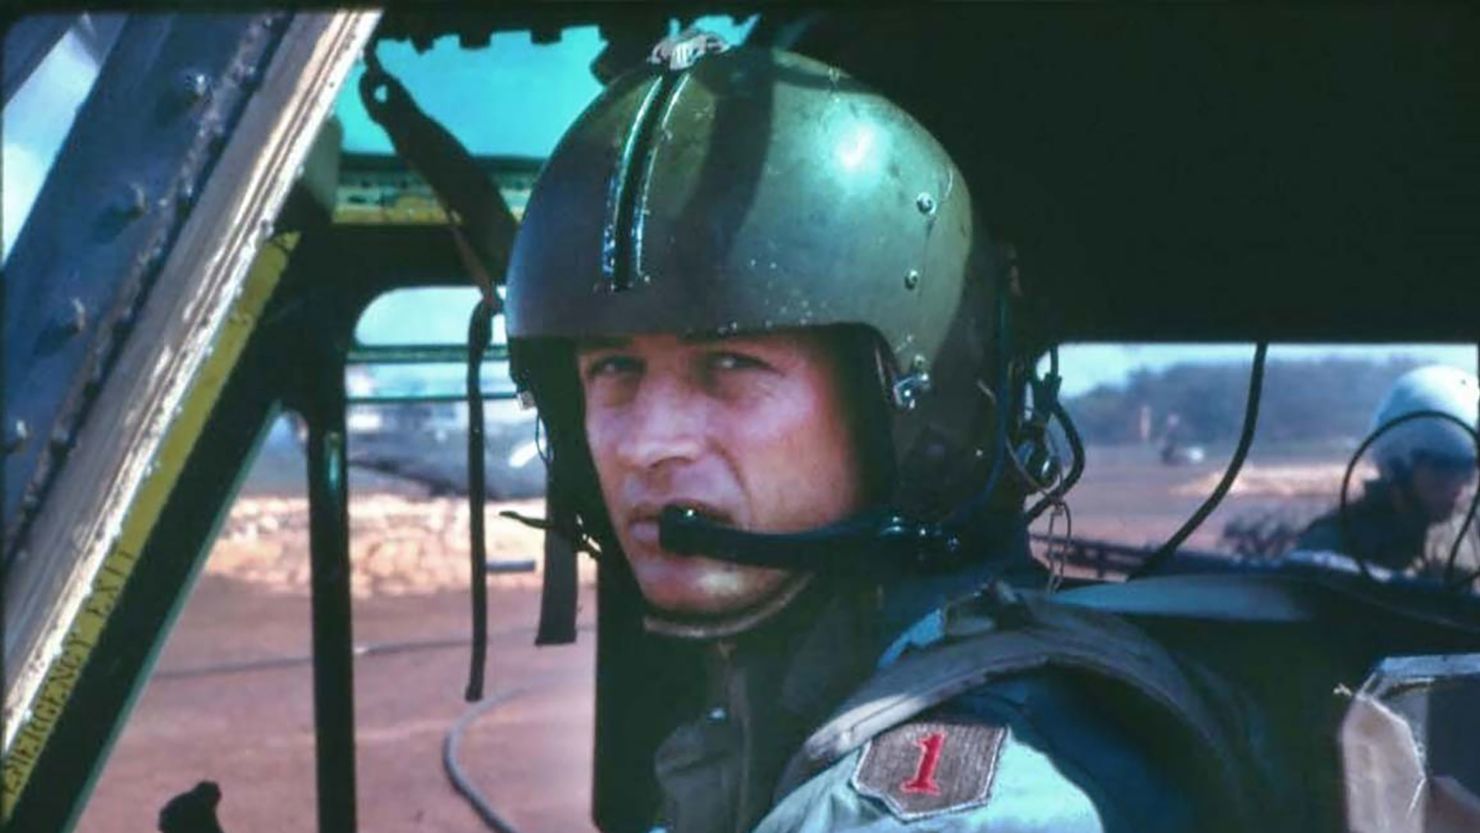 Then-1st Lt. Larry L. Taylor in his UH-1 "Huey" helicopter. Taylor served in Vietnam from 1967 to 1968 with D Troop (Air), 1st Squadron, 4th Cavalry, 1st Infantry Division. He flew over 2,000 combat missions in UH-1 and Cobra helicopters. 